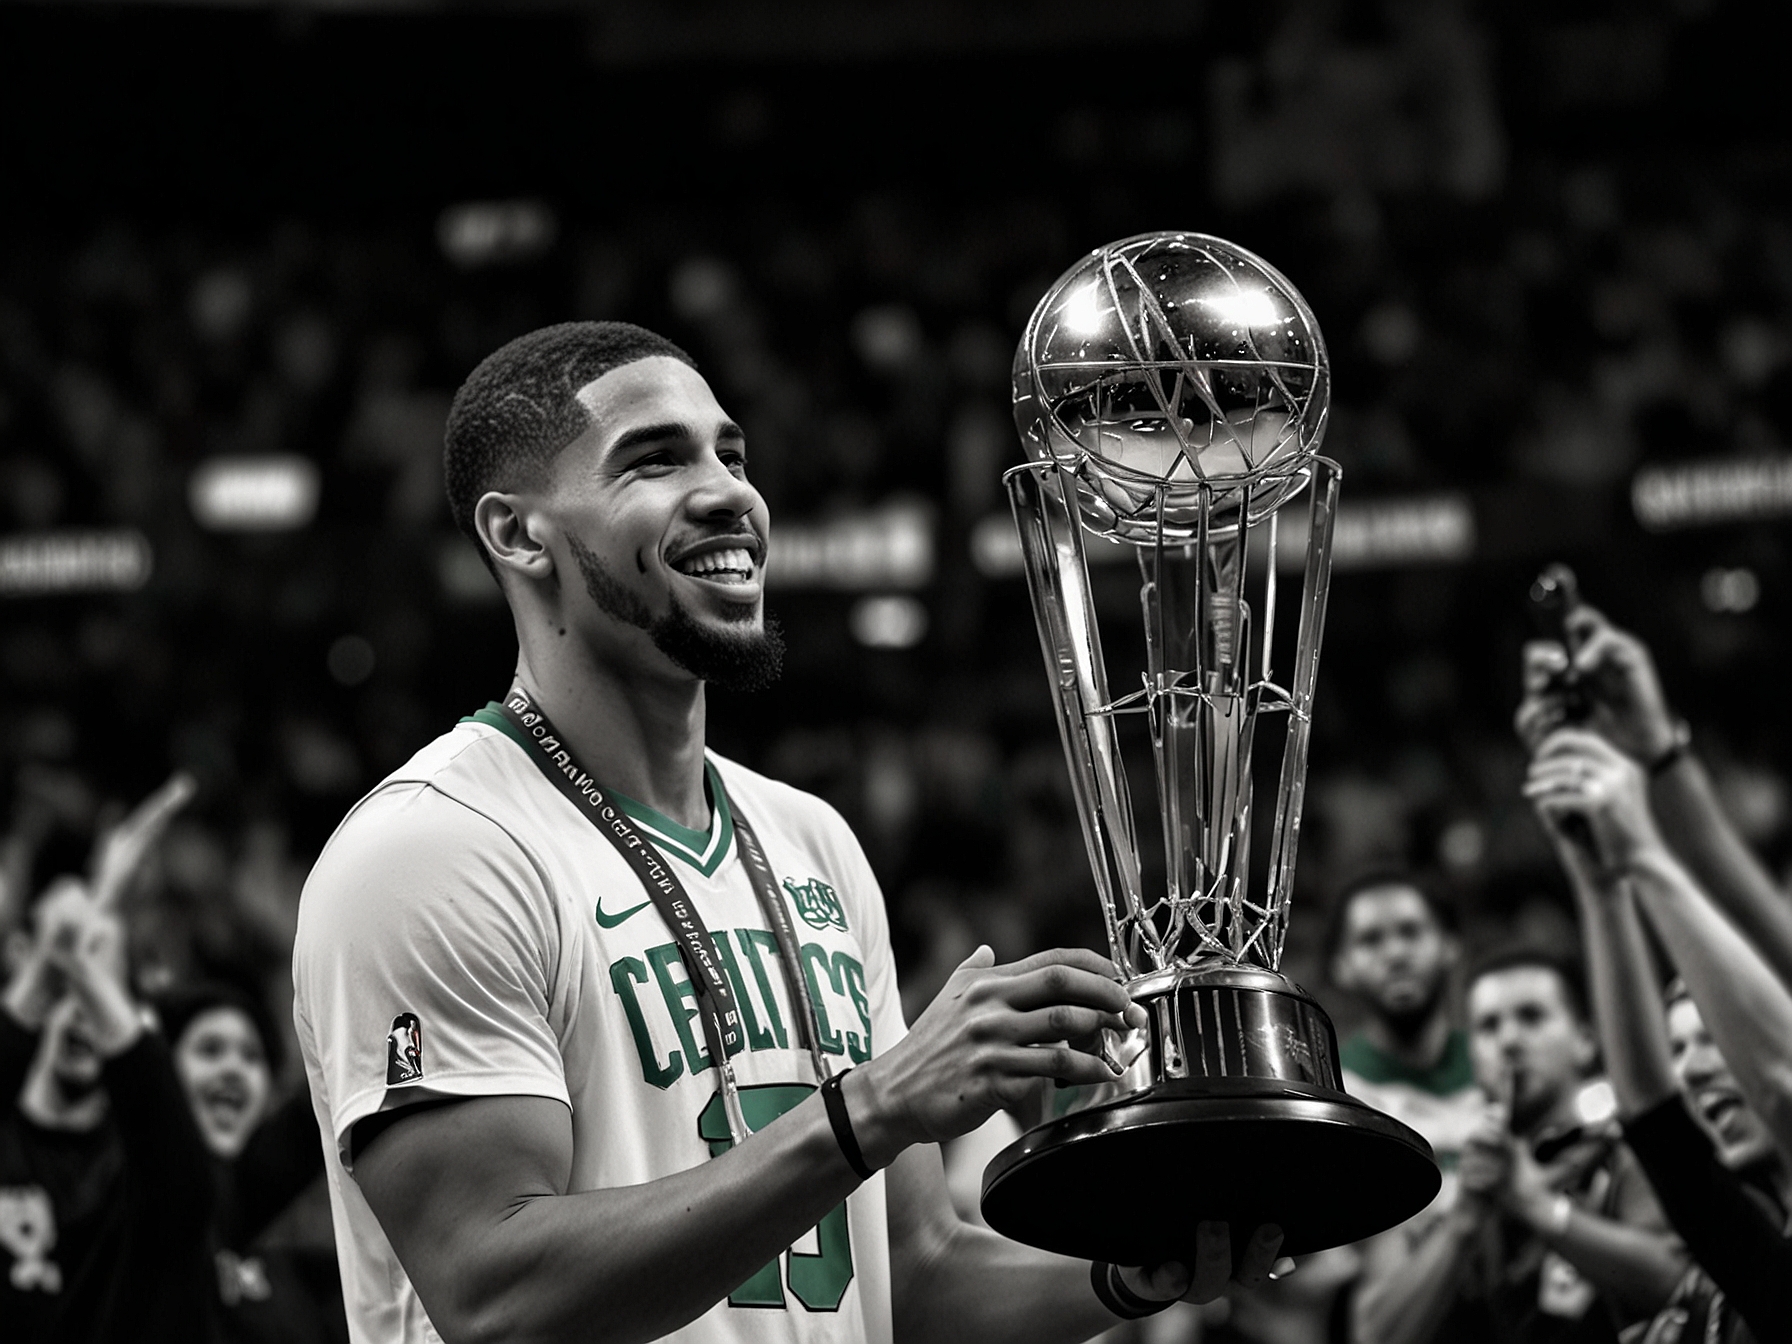 Jayson Tatum celebrates with the championship trophy after leading the Boston Celtics to their 18th NBA title, highlighting his Finals MVP performance.